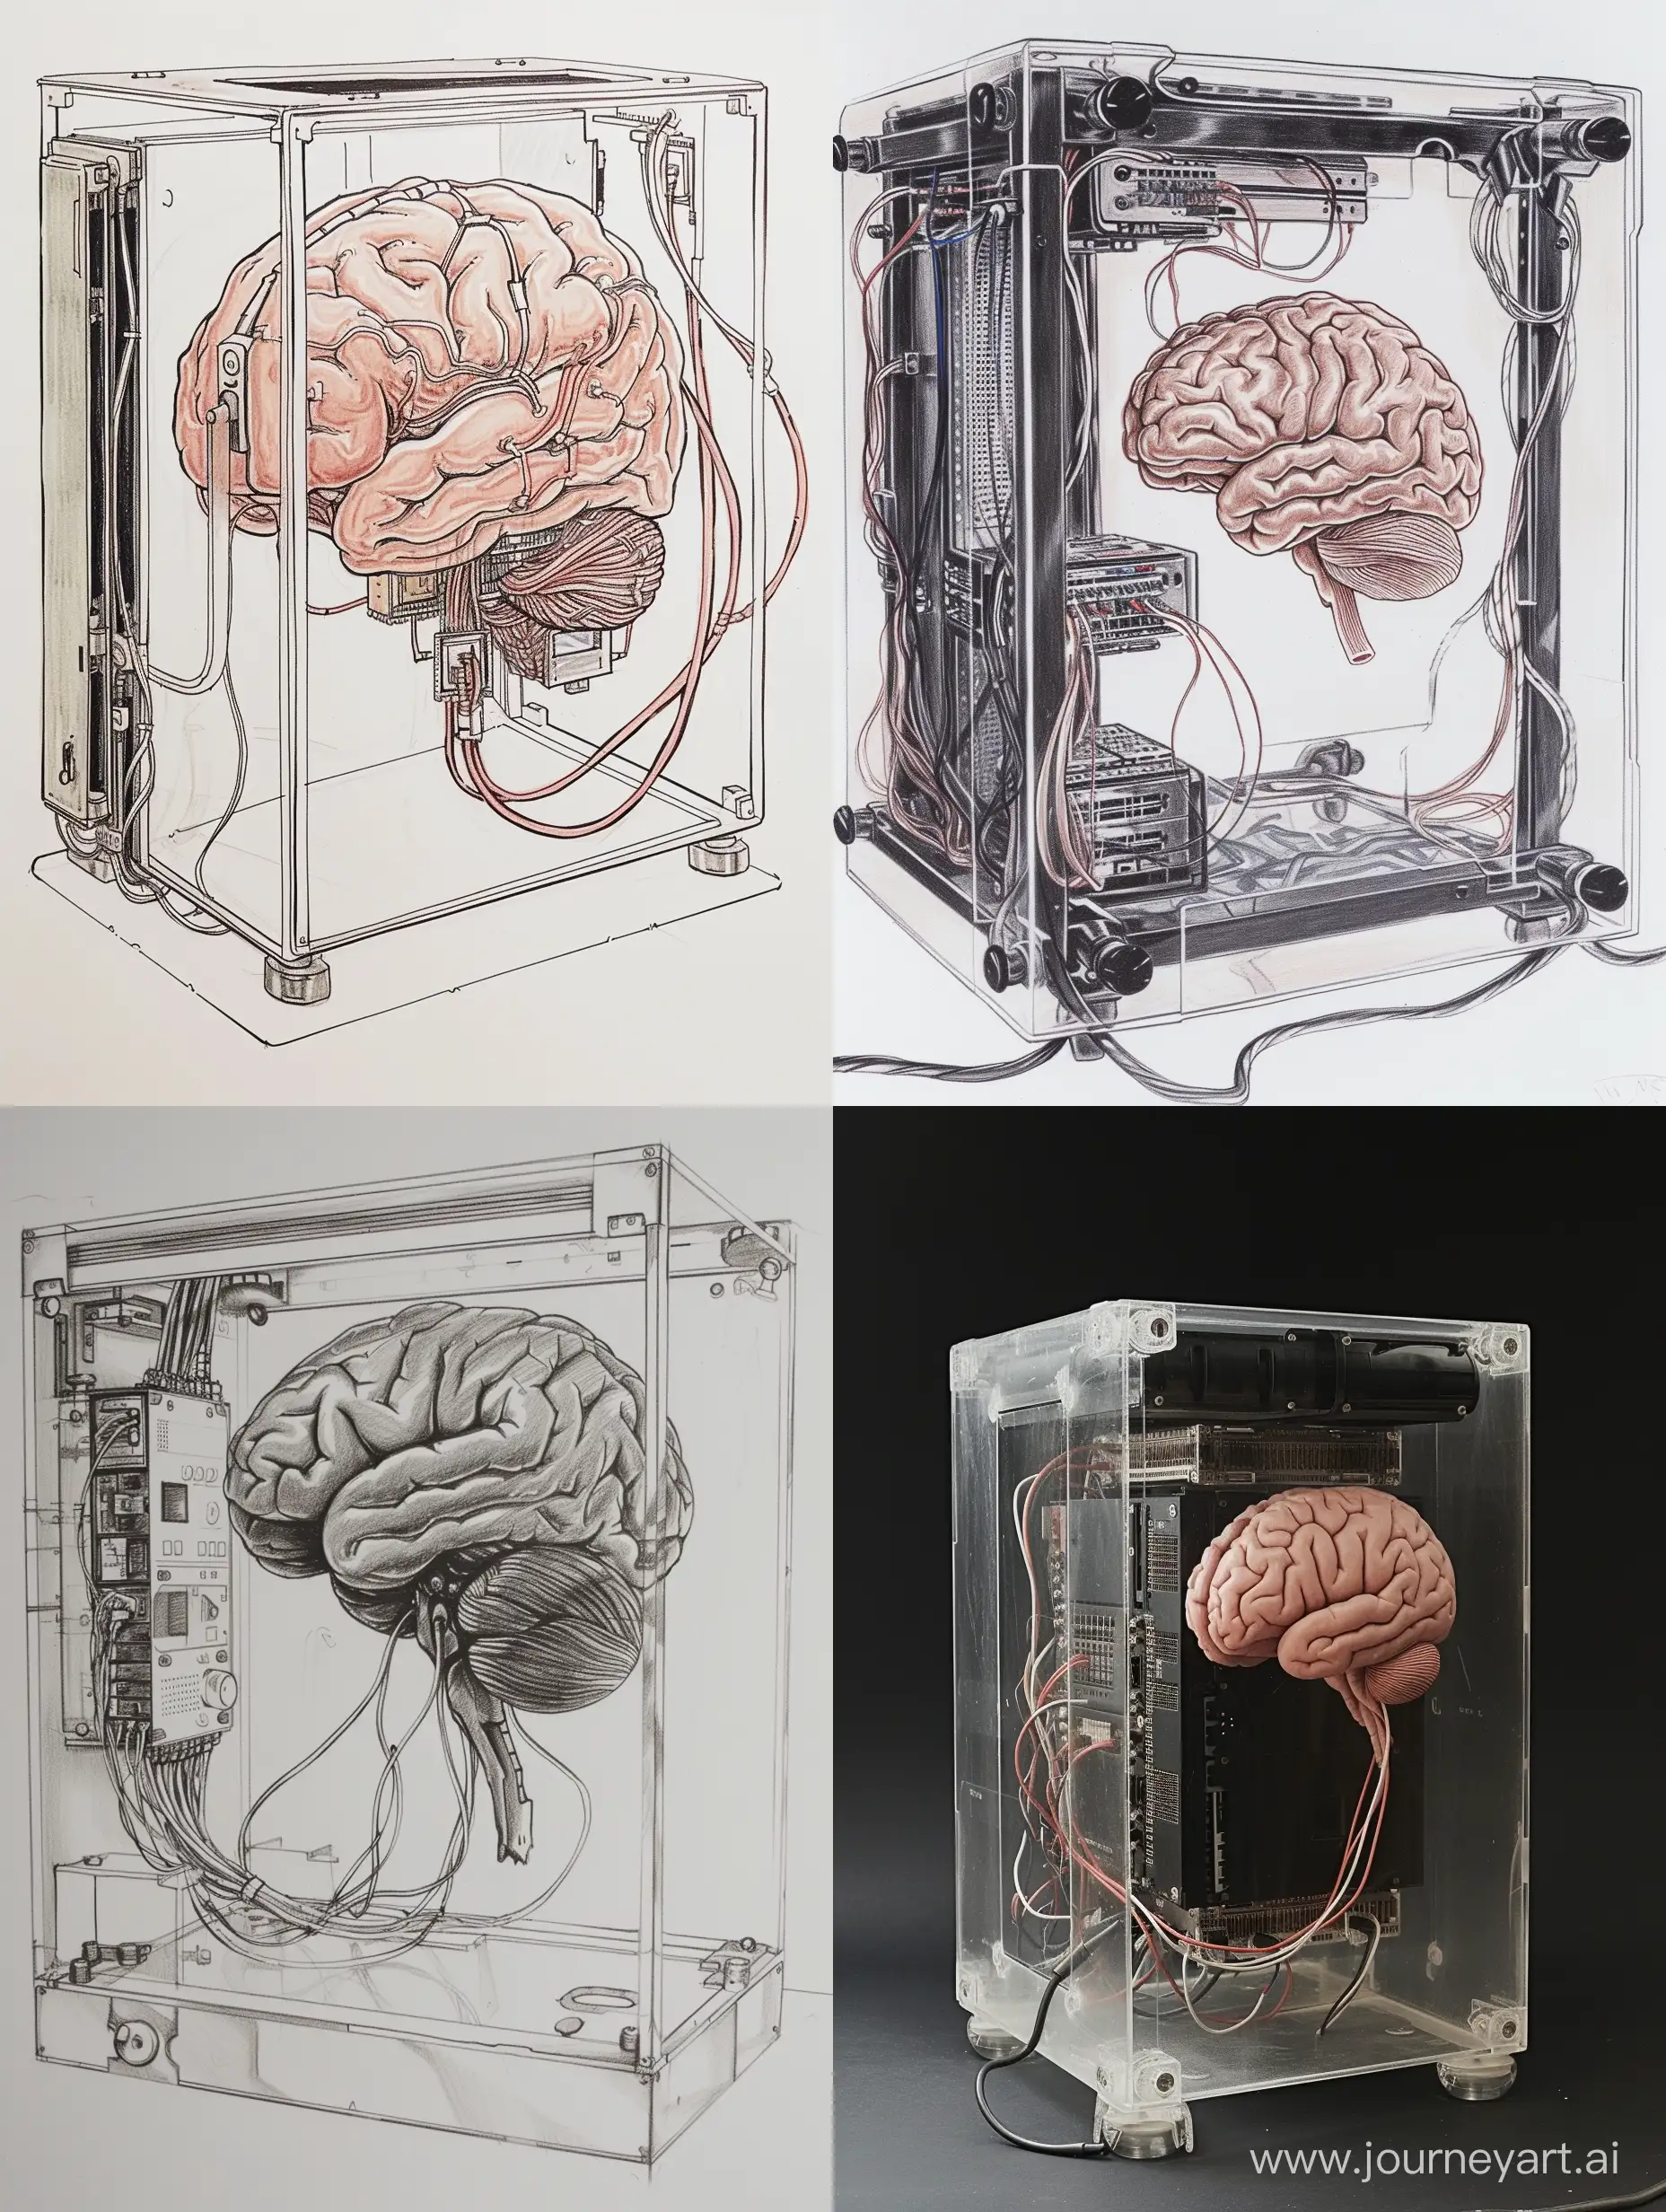 
draw a brain inside a clear computer box with wires connected to it